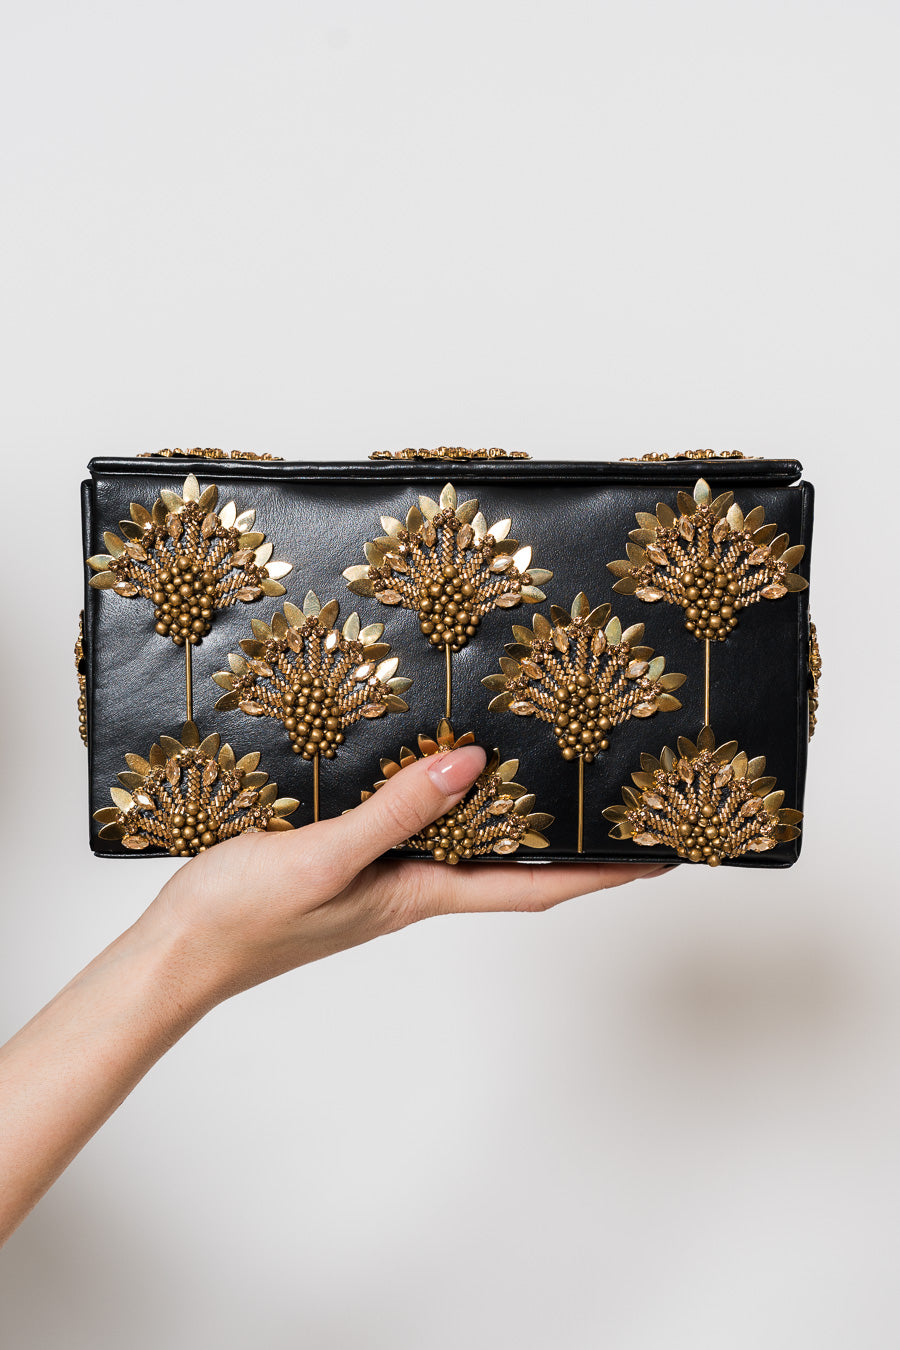 Edeline Clutch